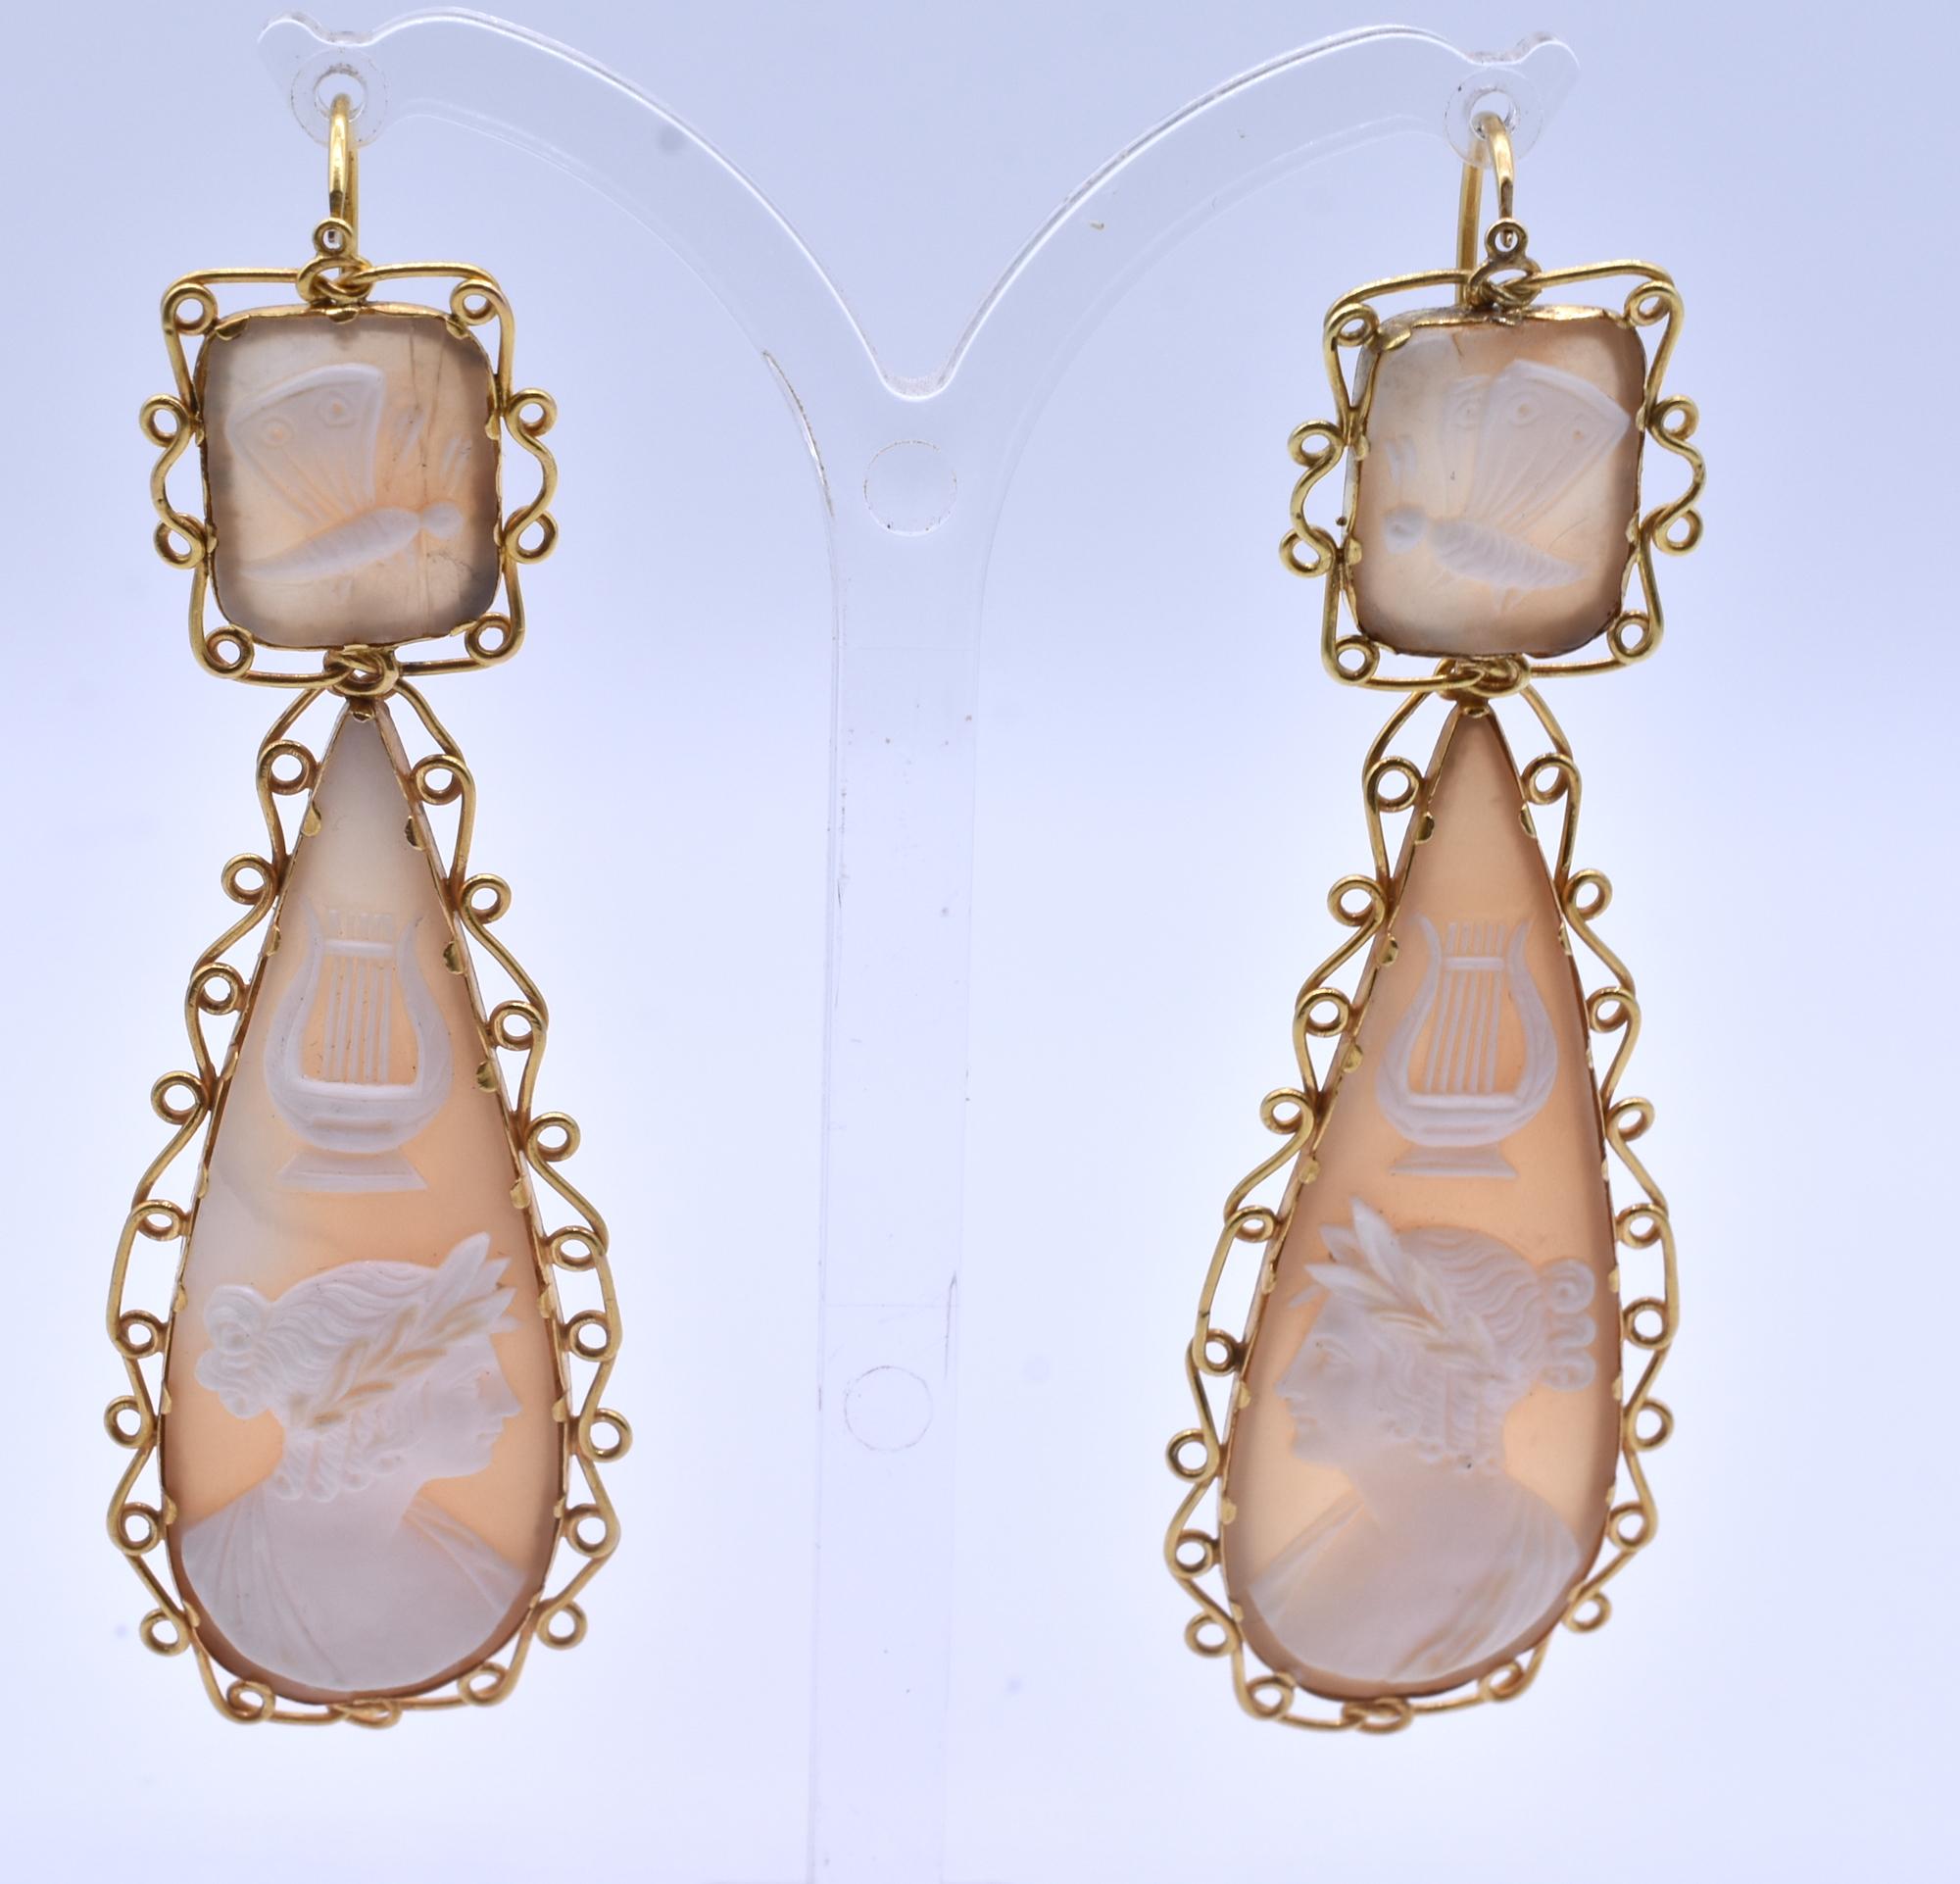 Lovely day/night shell soft pink cameo earrings bordered with delicate 18k gold loops and a carved depiction of Apollo,  god of the Arts in Greek and Roman mythology. iApollo represented culture and civilization and was the image of male beauty as